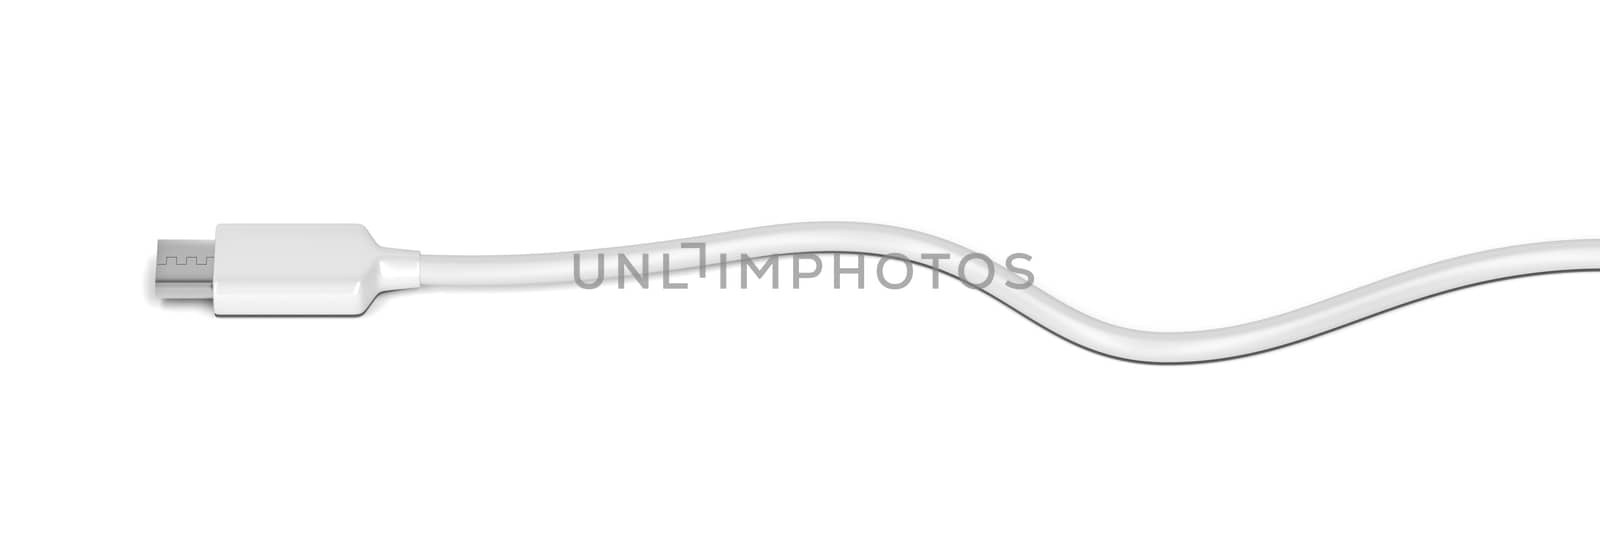 USB-C cable on white background, 3D illustration